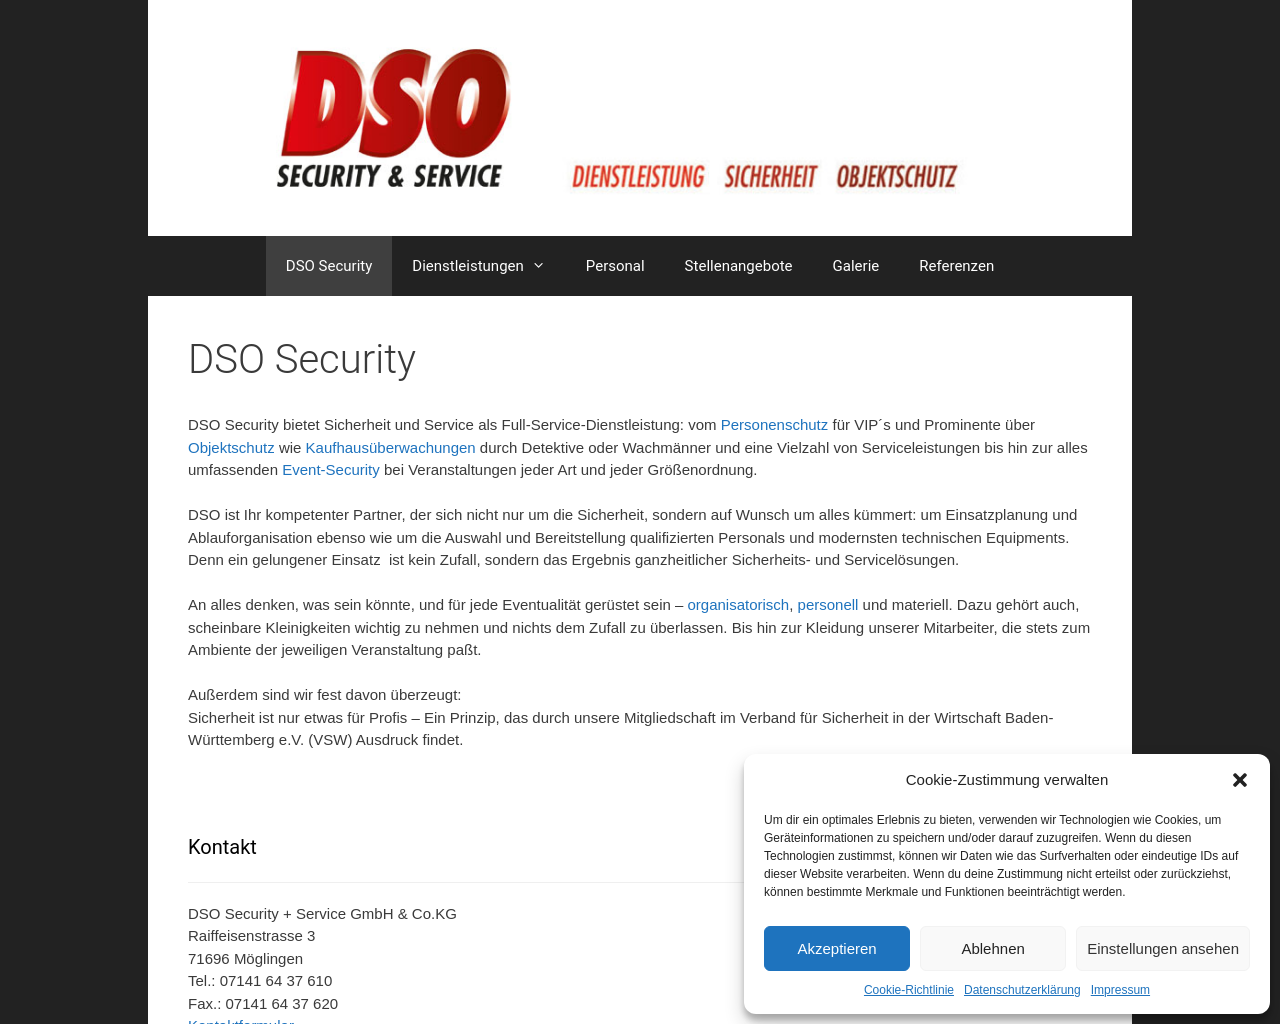 dso-security.com